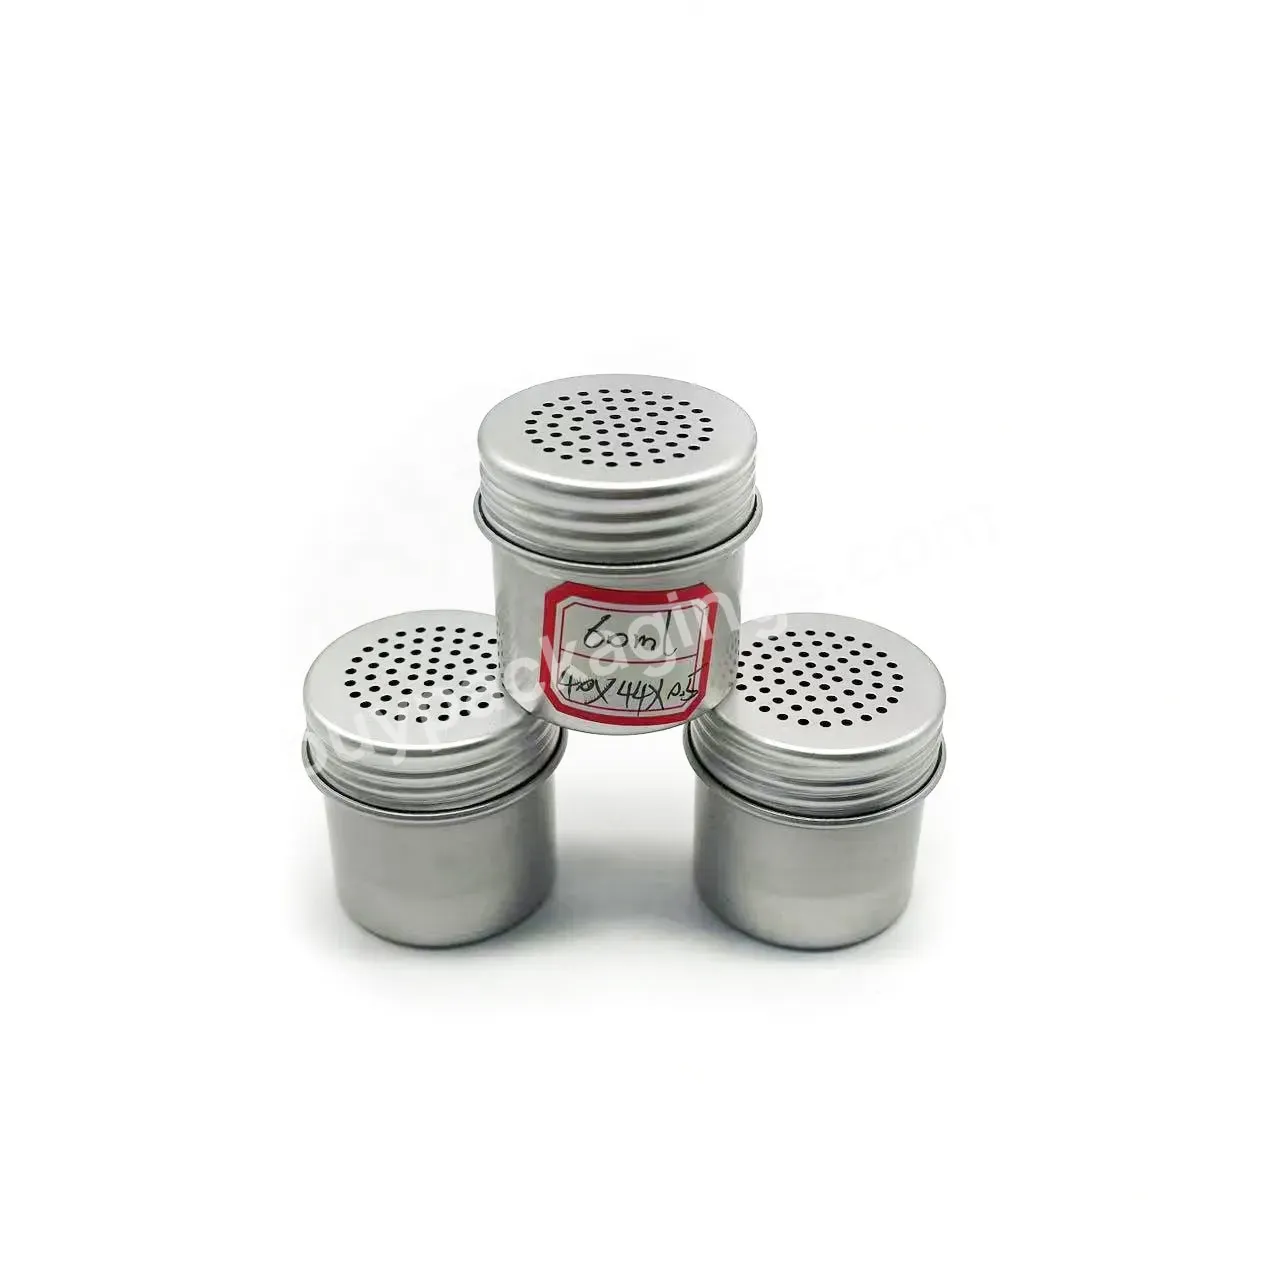 40g Empty Food Grade Metal Tin Cap With Holes For Msg Chili Powder Cumin Powder Silver Aluminum Sprinkling Container